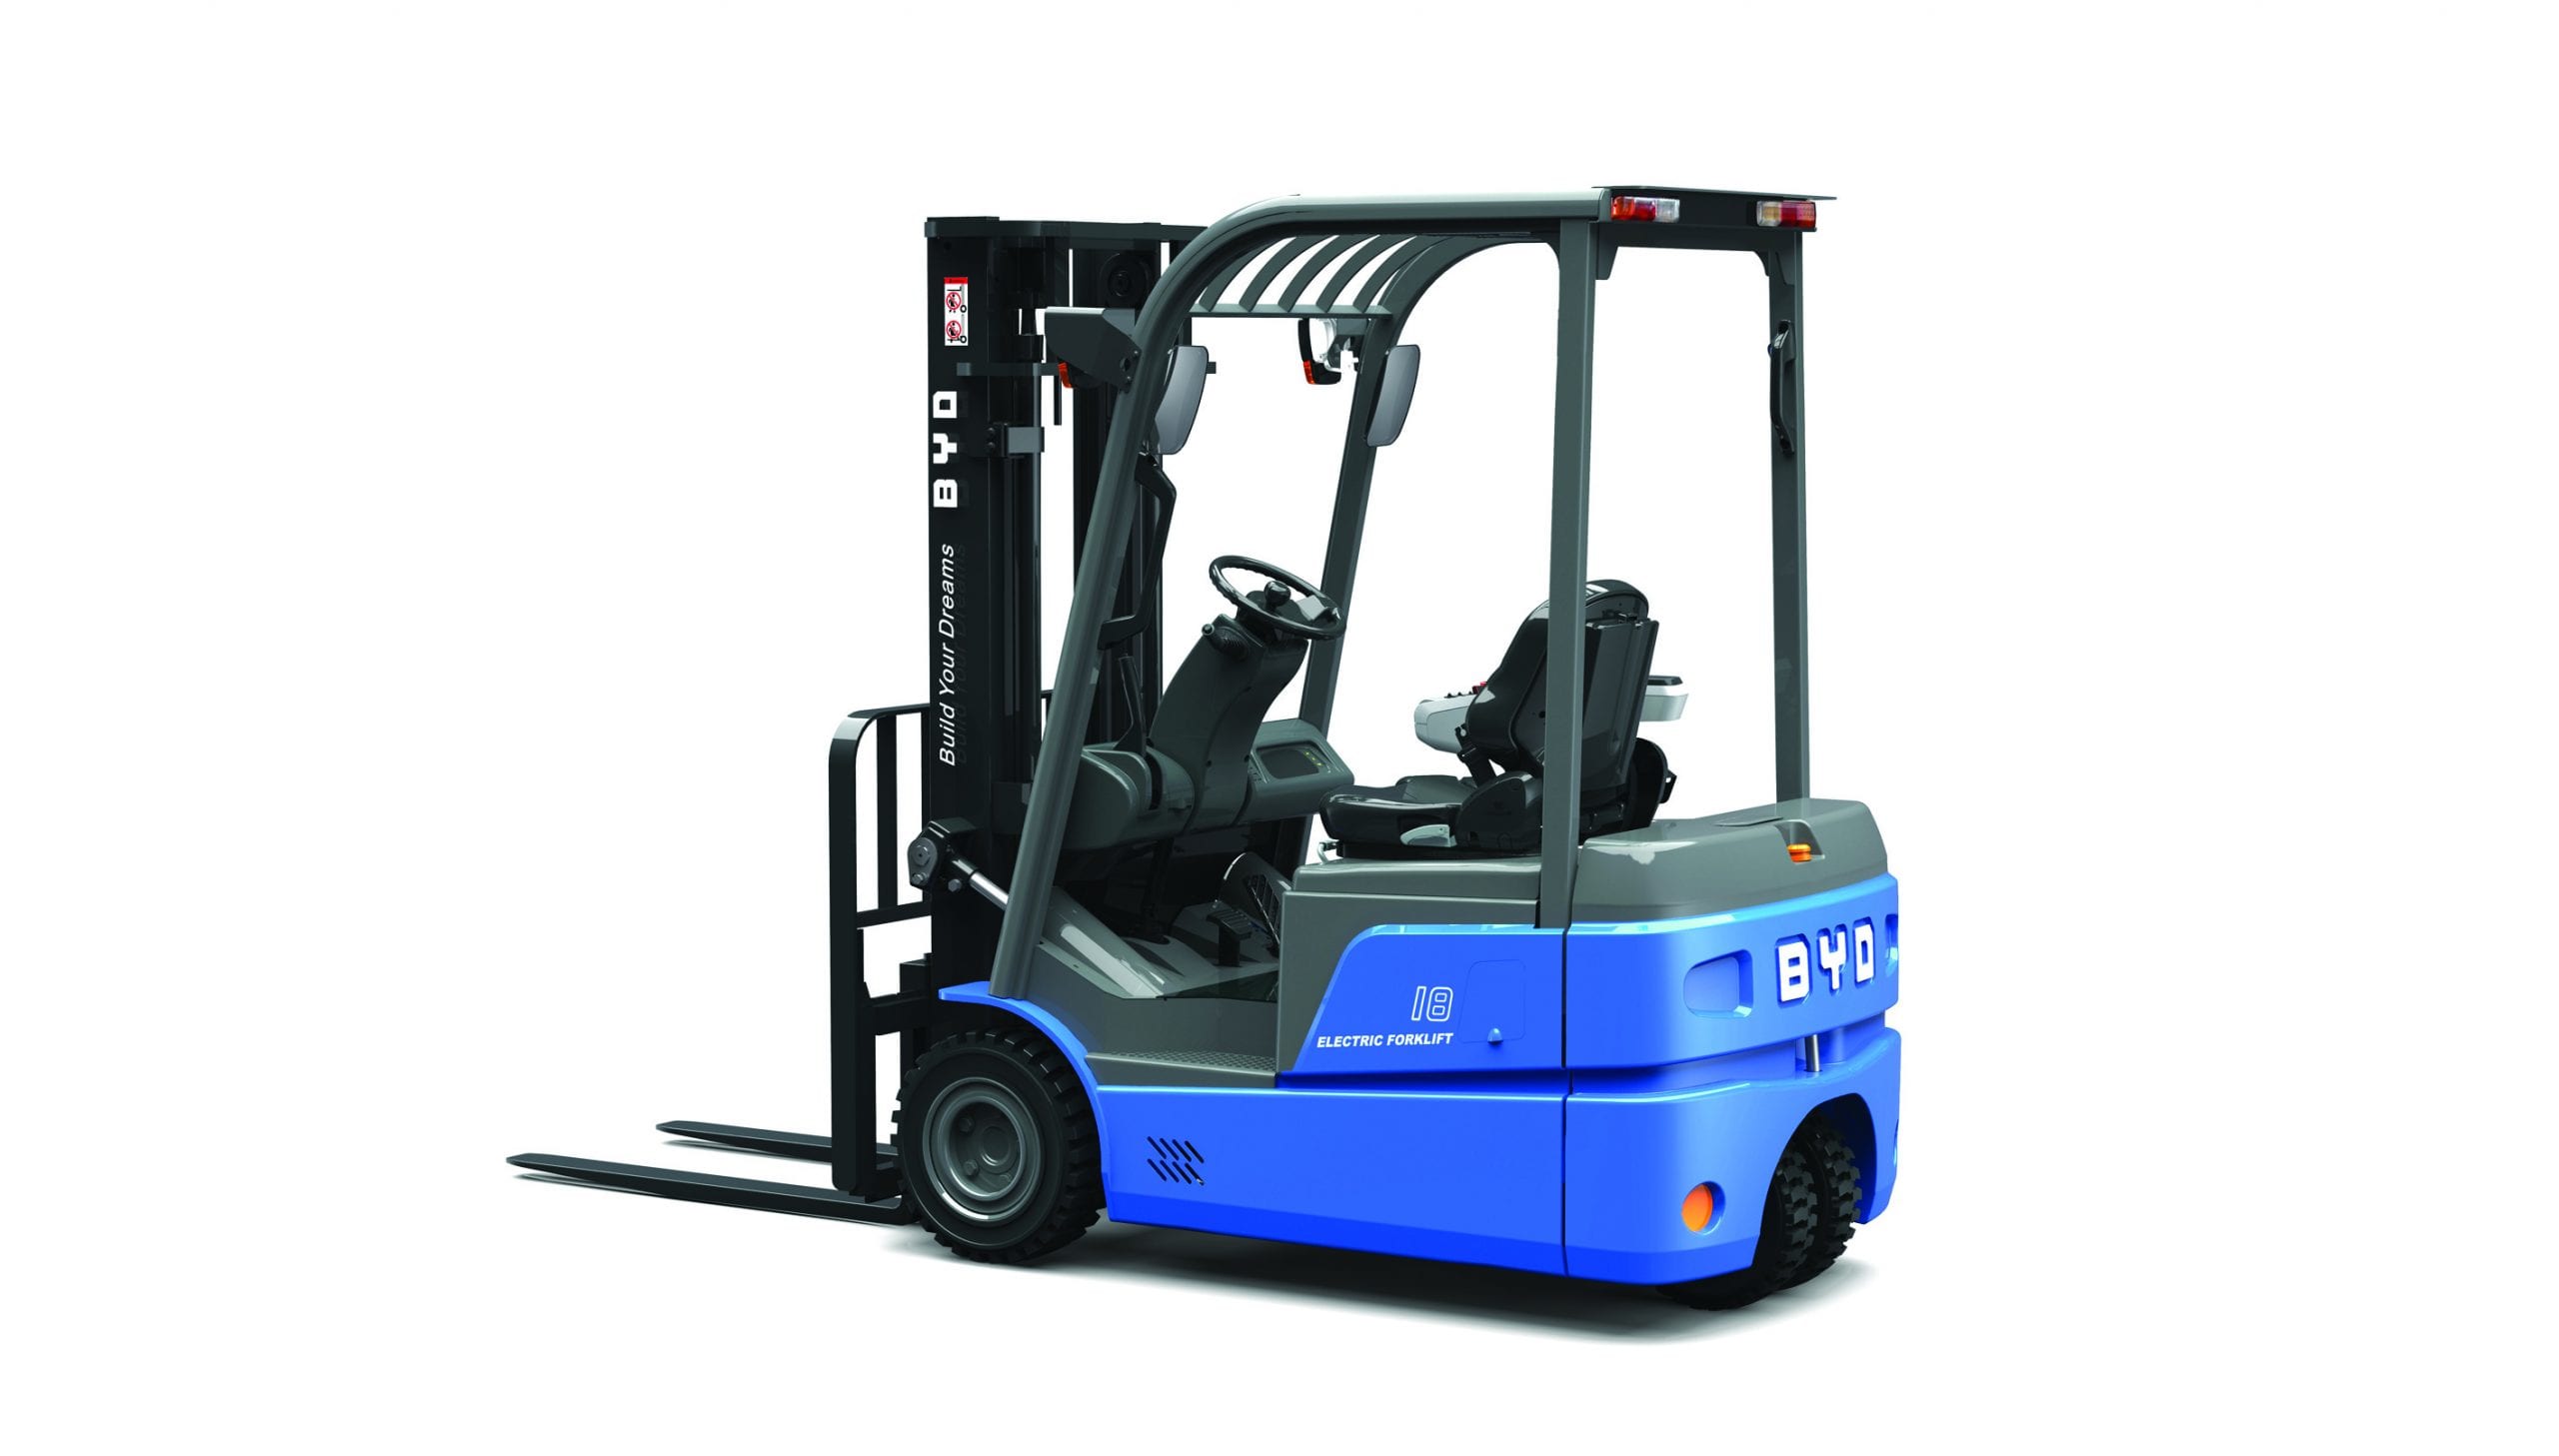 Lithium-Ion Forklifts for Sale in Northampton, Nottingham, Derby, Warwick, Leicester, Birmingham and across East Midlands, and West Midlands. 